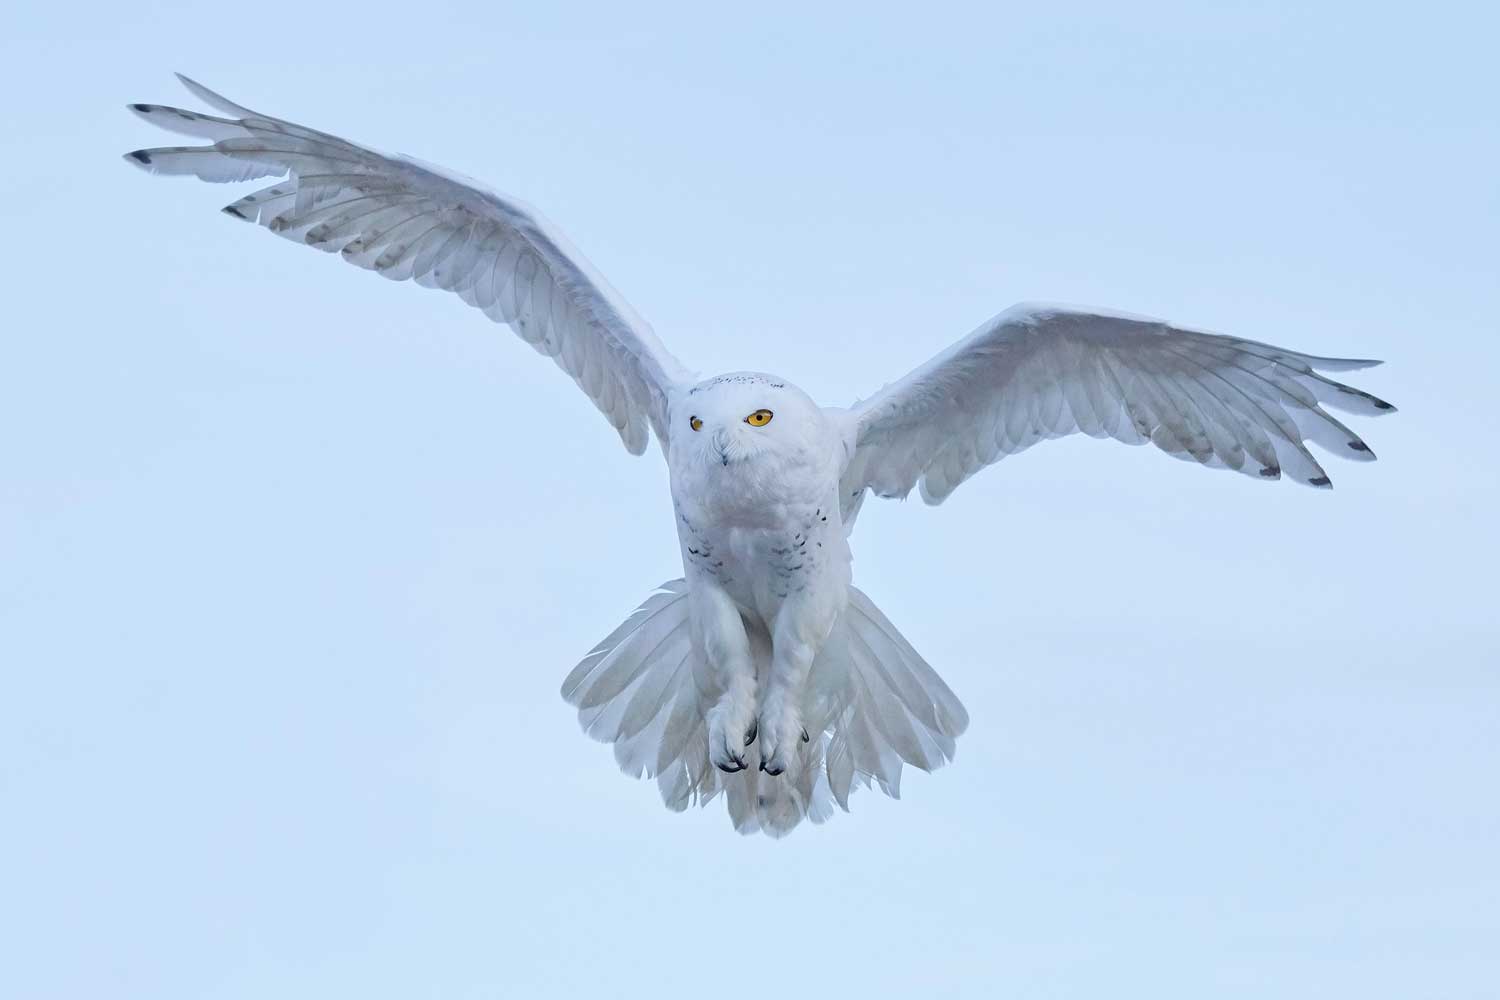 Snowy owl flying in the air.